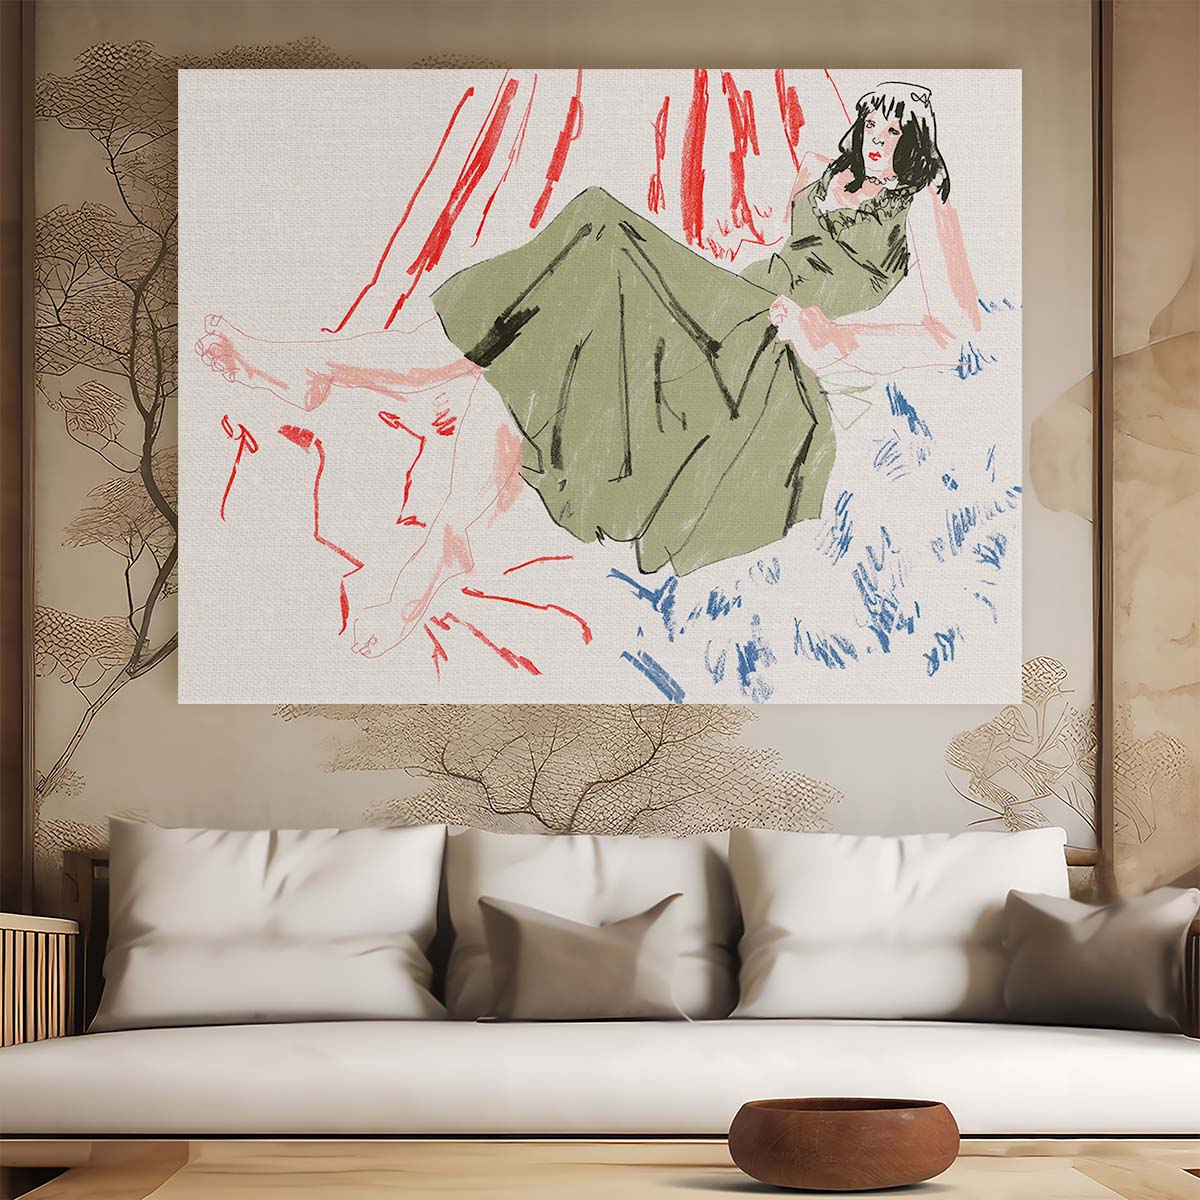 Elegant Woman in Green Dress Pencil Portrait Wall Art by Luxuriance Designs. Made in USA.